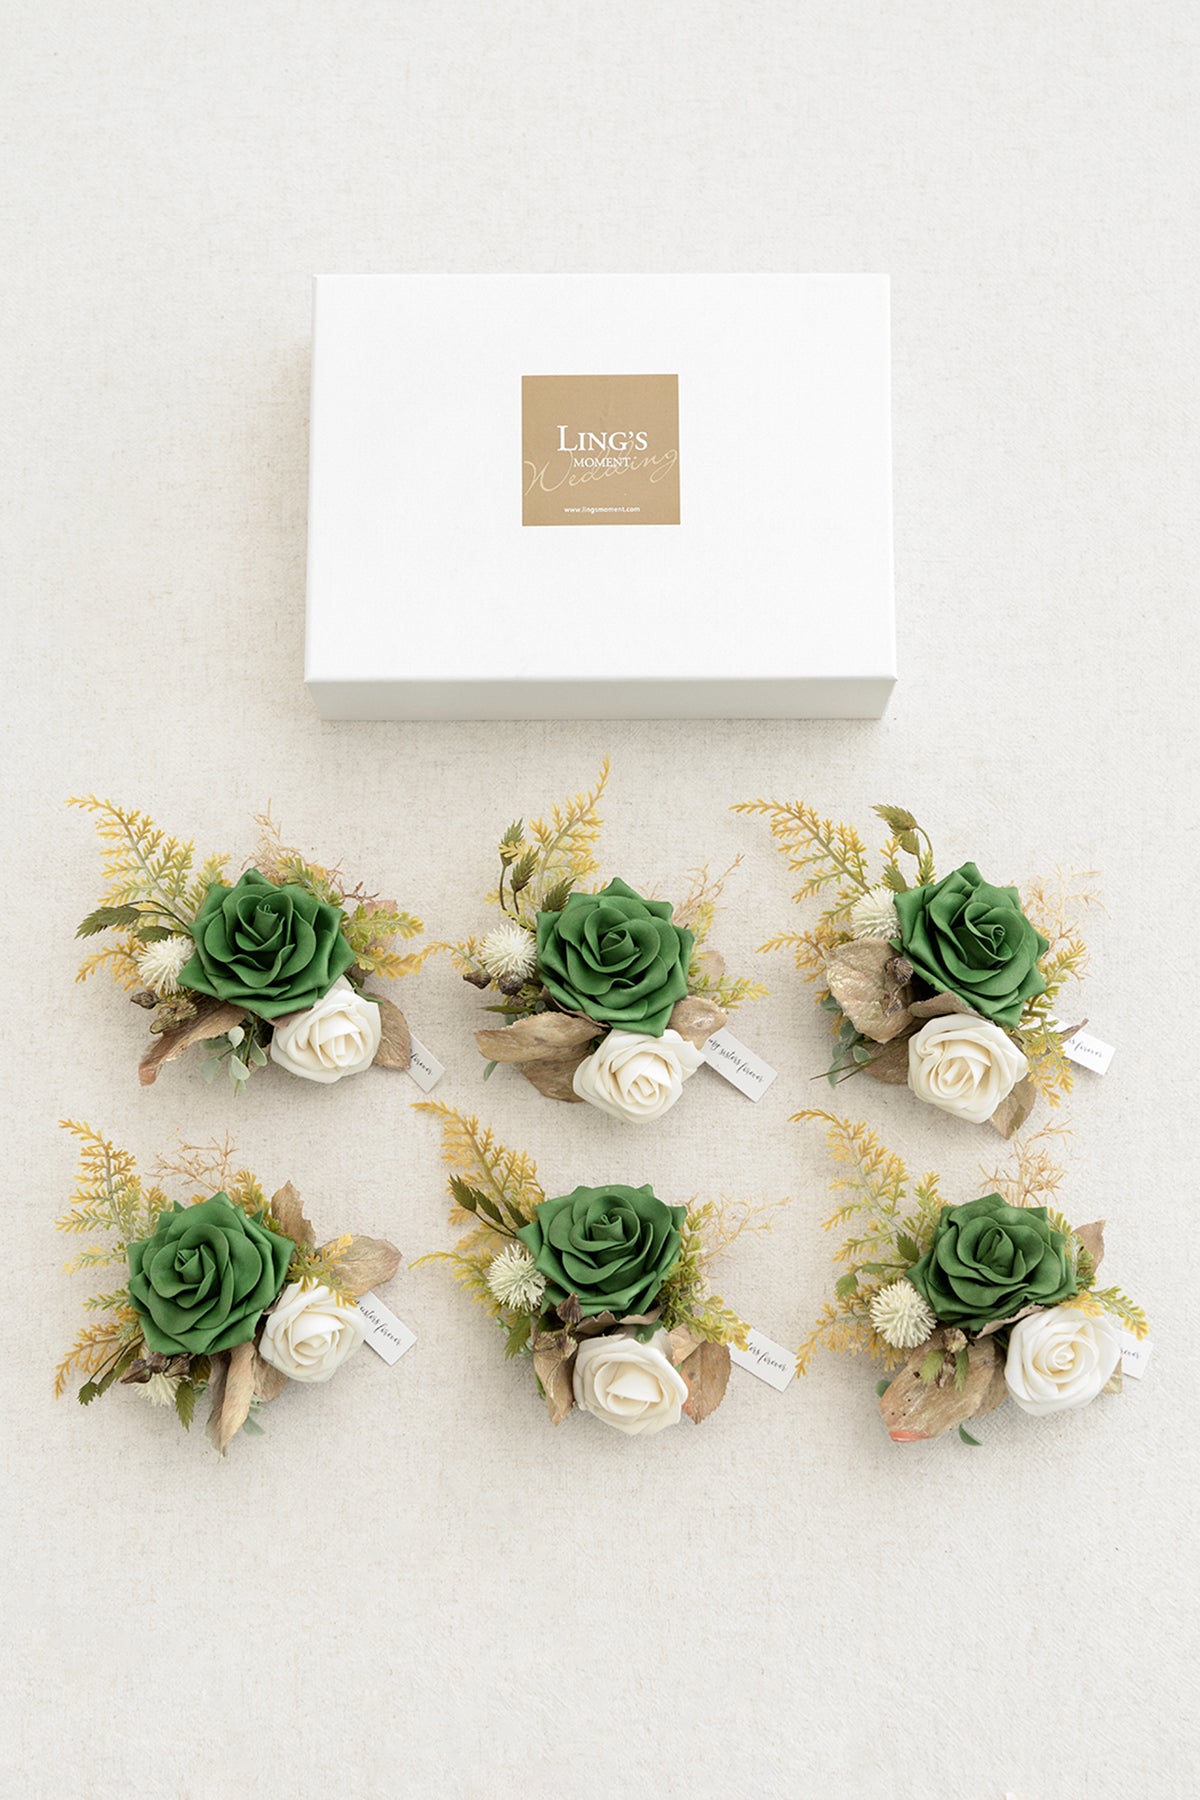 Wrist Corsages in Emerald & Tawny Beige